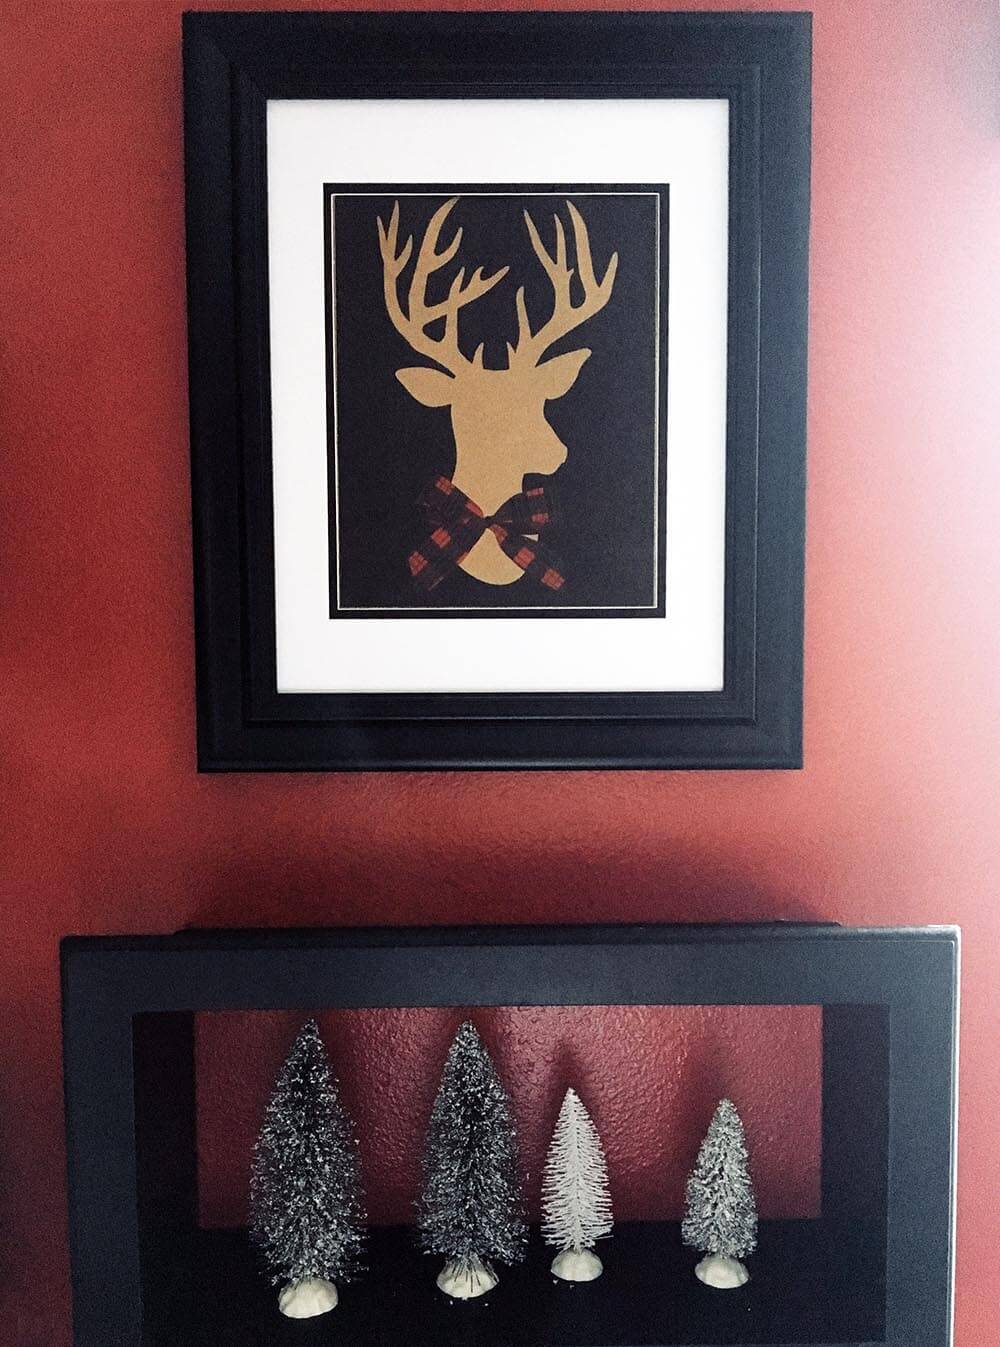 Use gift bags in unexpected ways. I cut off the handles and framed this deer for boy's bedroom Christmas art.